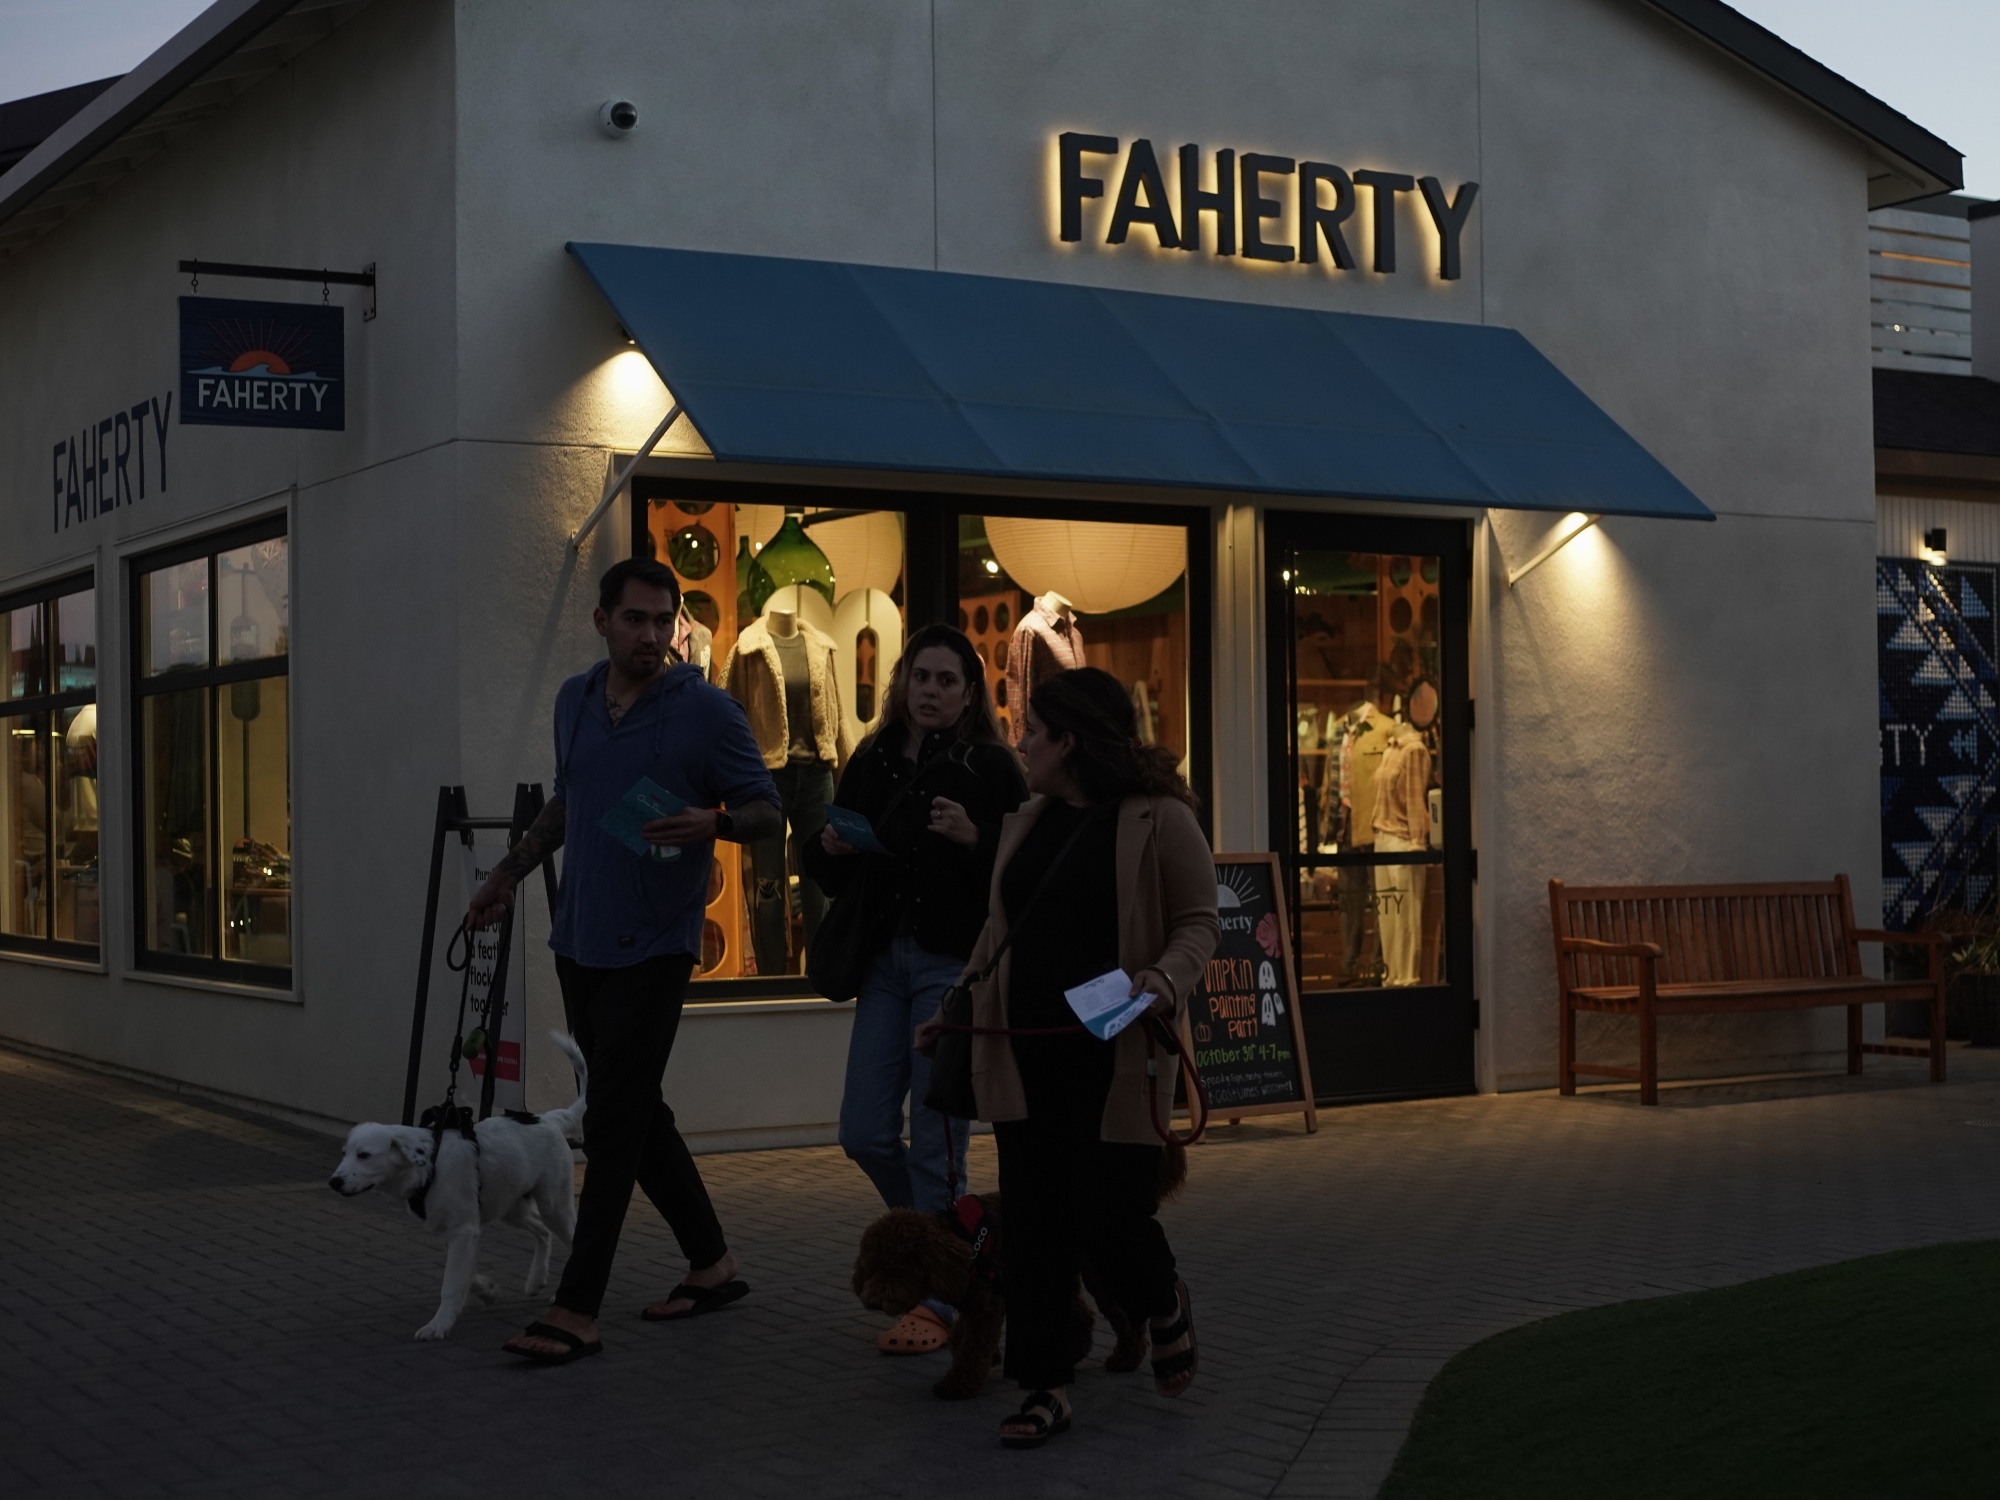 Apparel Maker Faherty Is Said to Explore Selling Minority Stake - Bloomberg